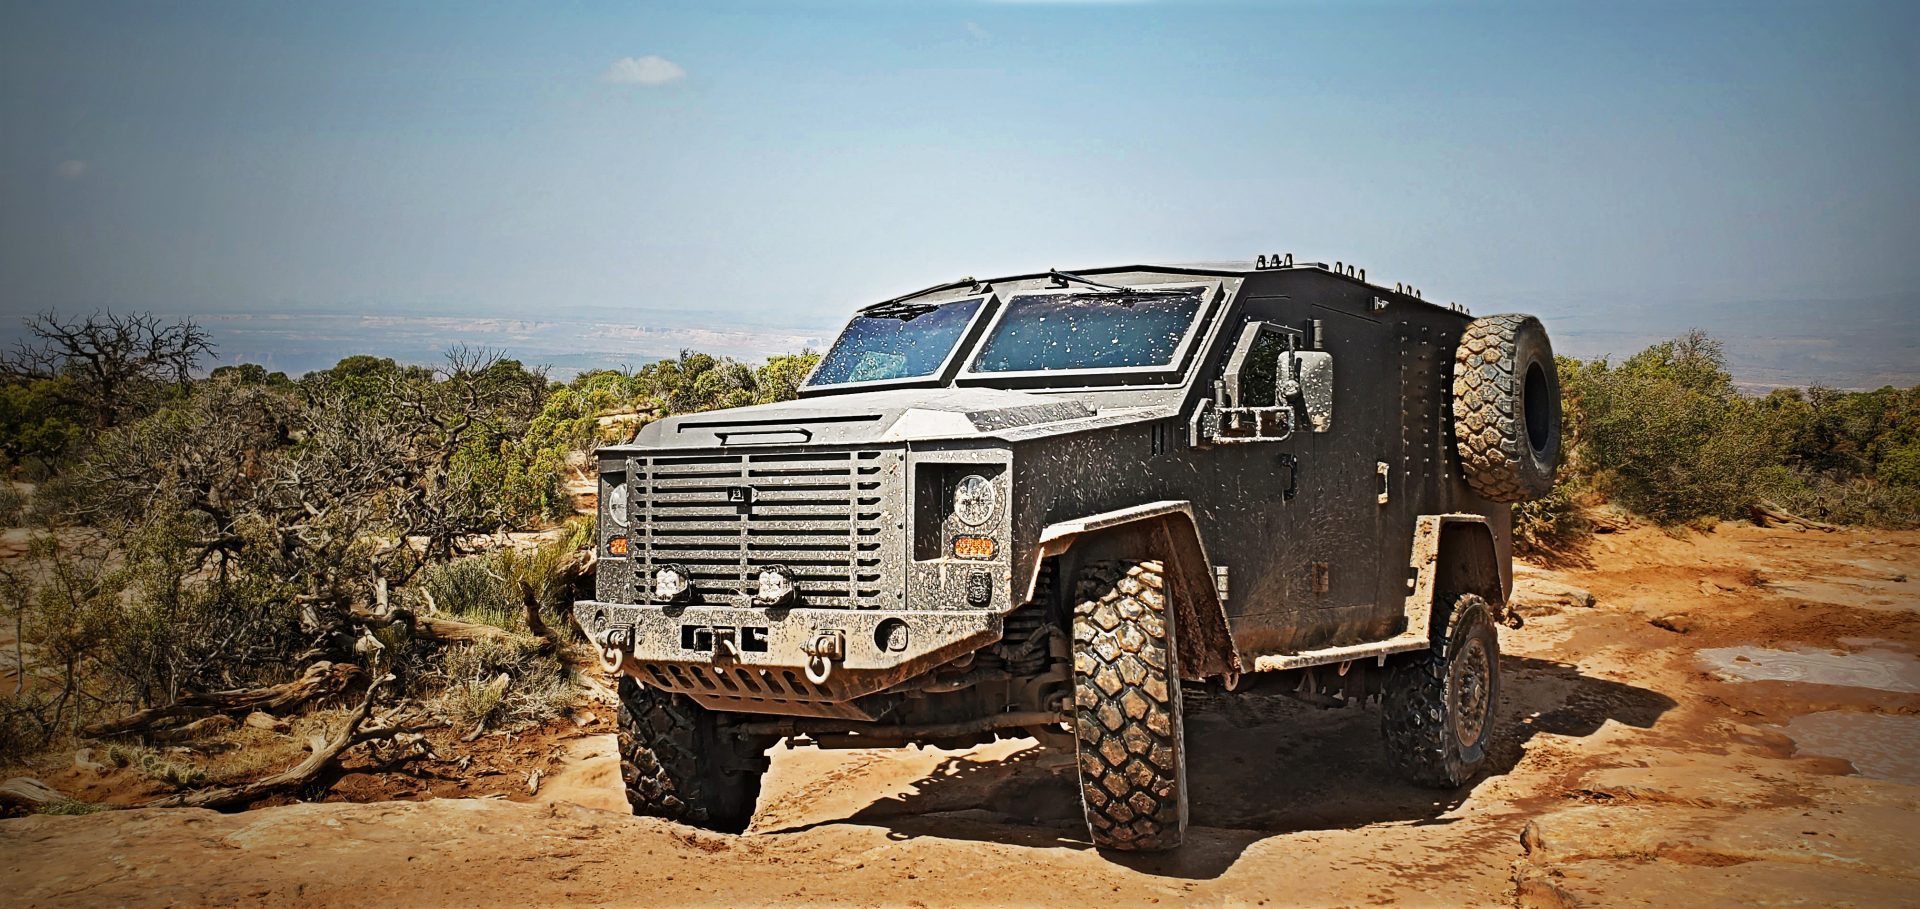 Lenco Armored Vehicles exhibiting at Association of the US Army’s 2021 Annual Meeting and Expo